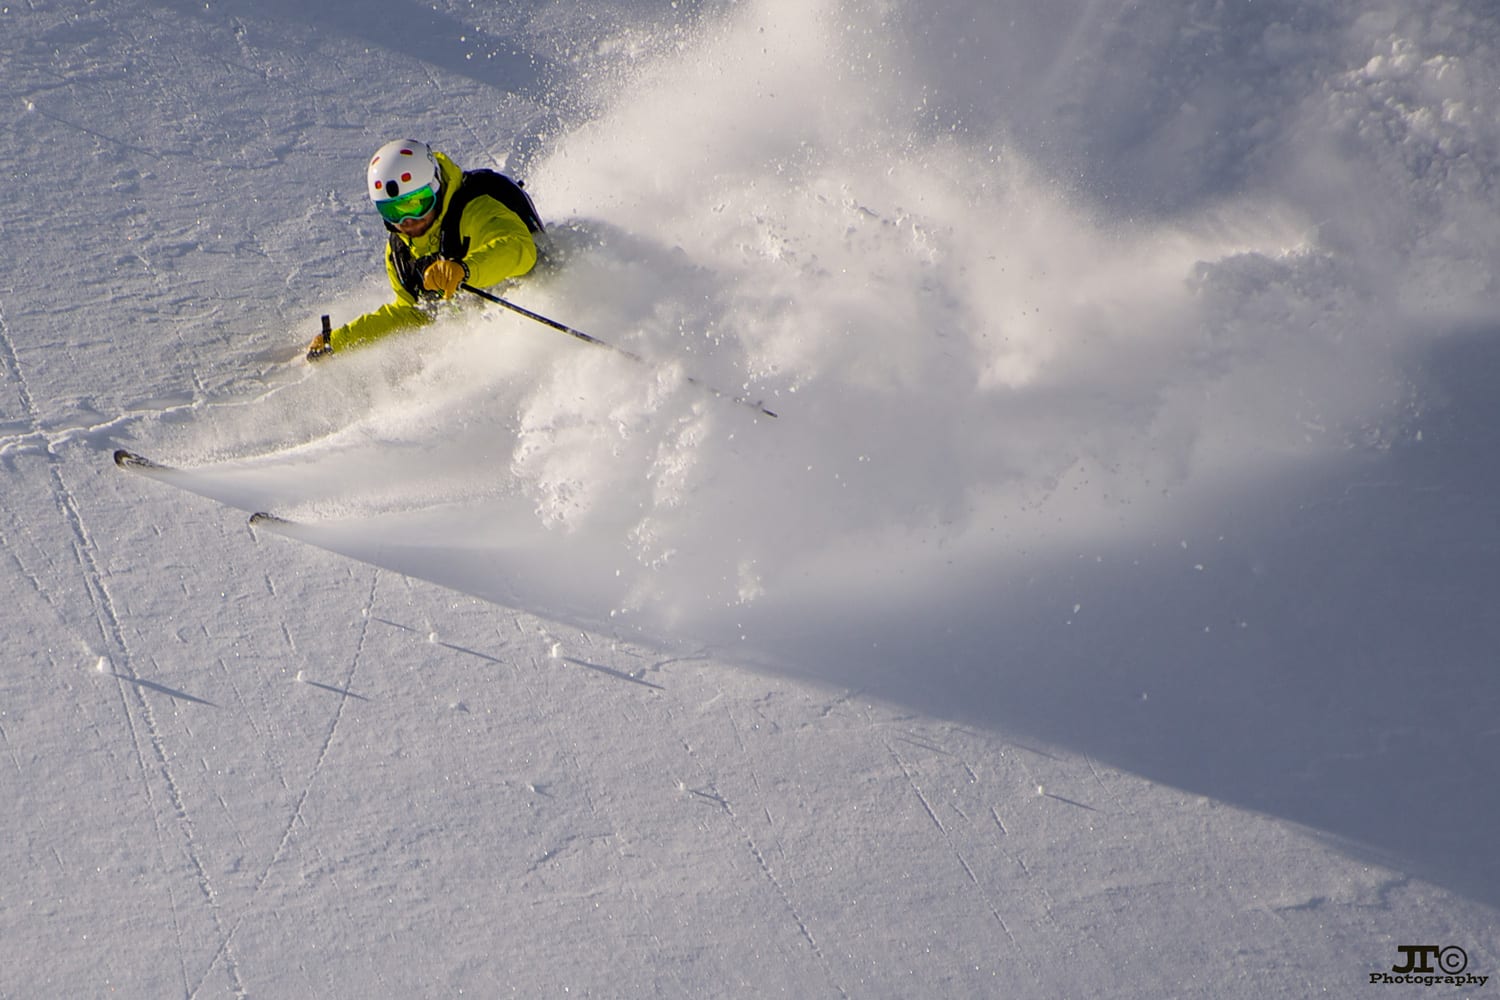 Where you can use your ski instructor qualifications will vary depending on your level